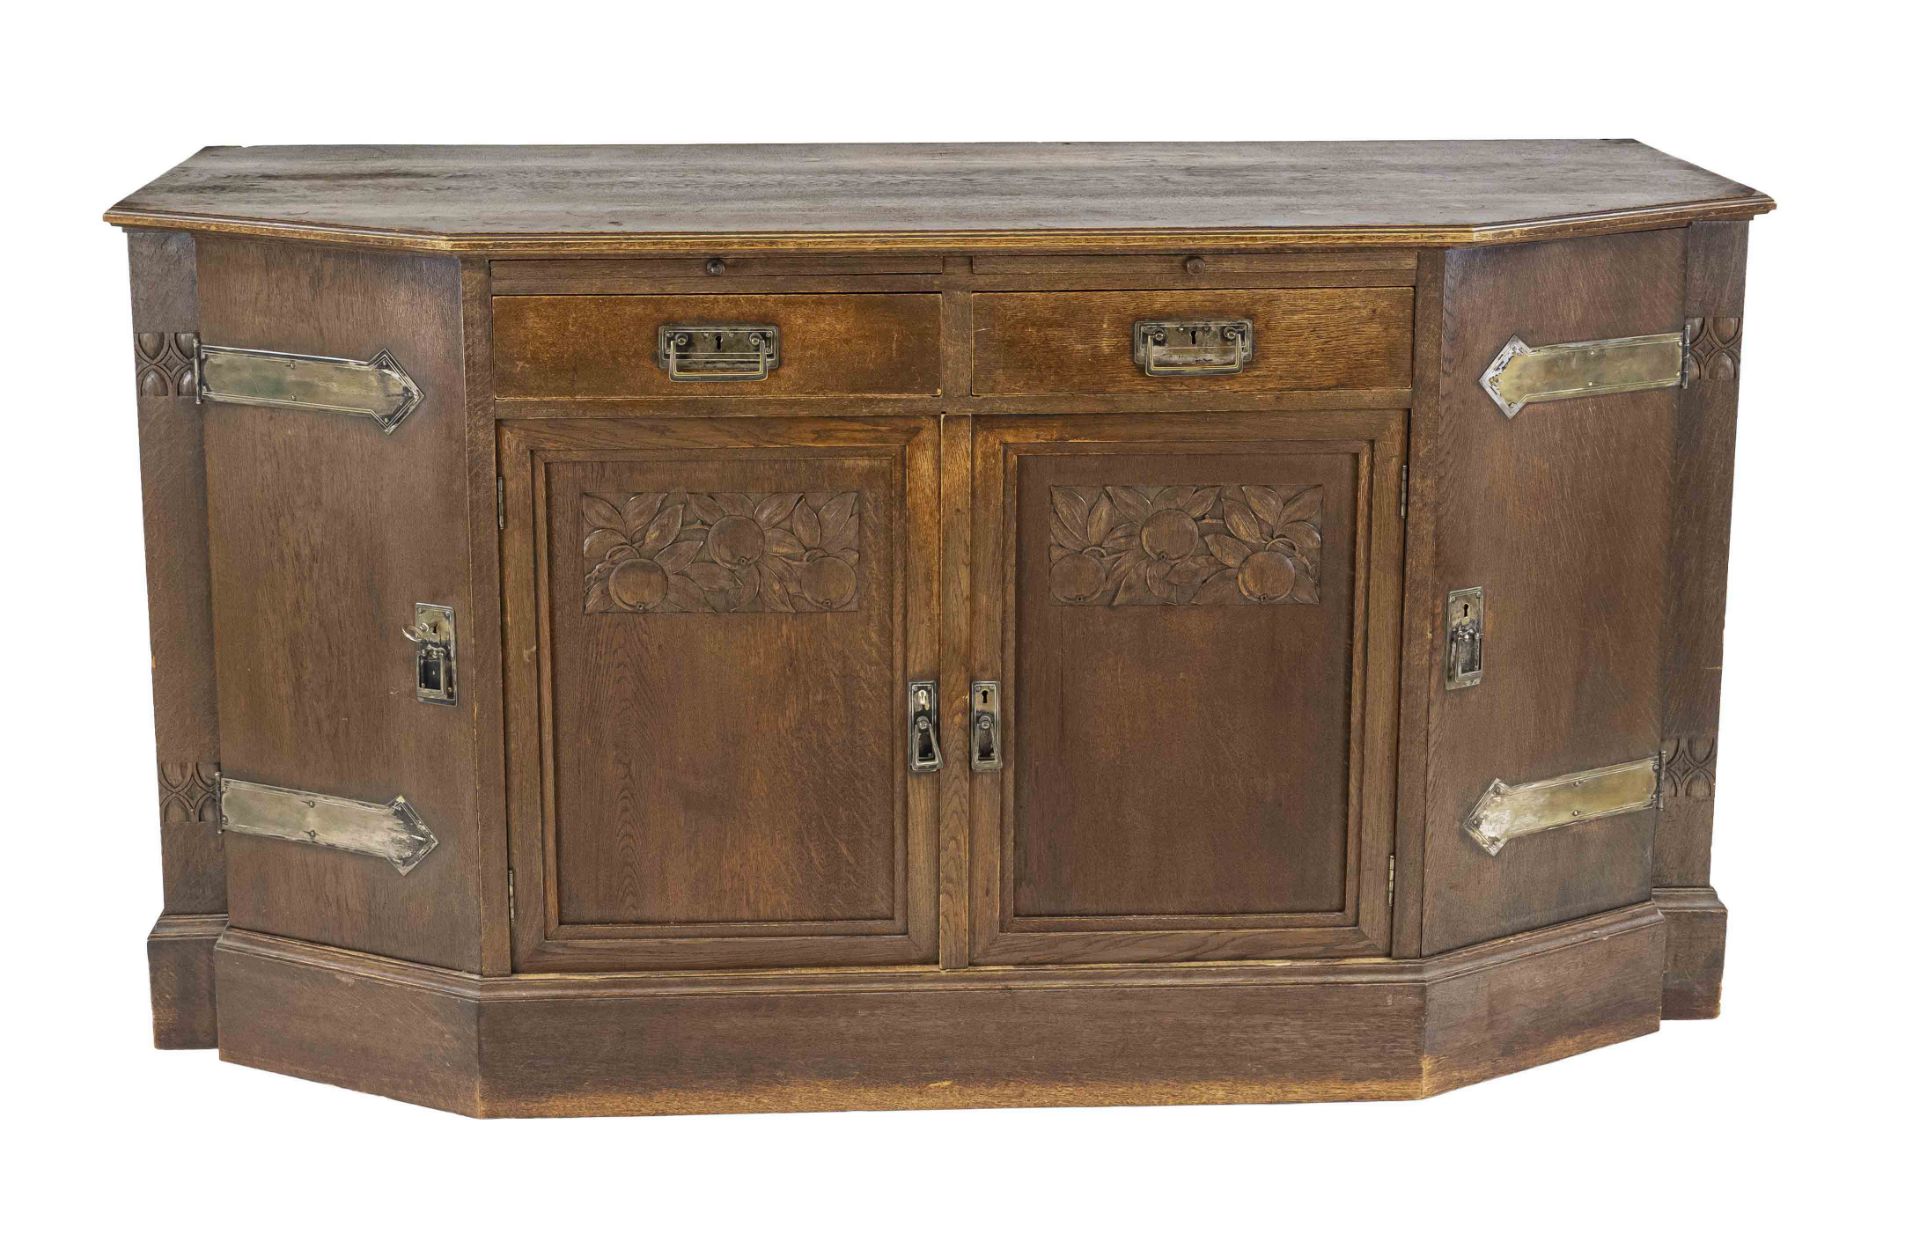 Art Nouveau sideboard circa 1910, oak, four doors and two drawers, subtle carved decoration, 98 x